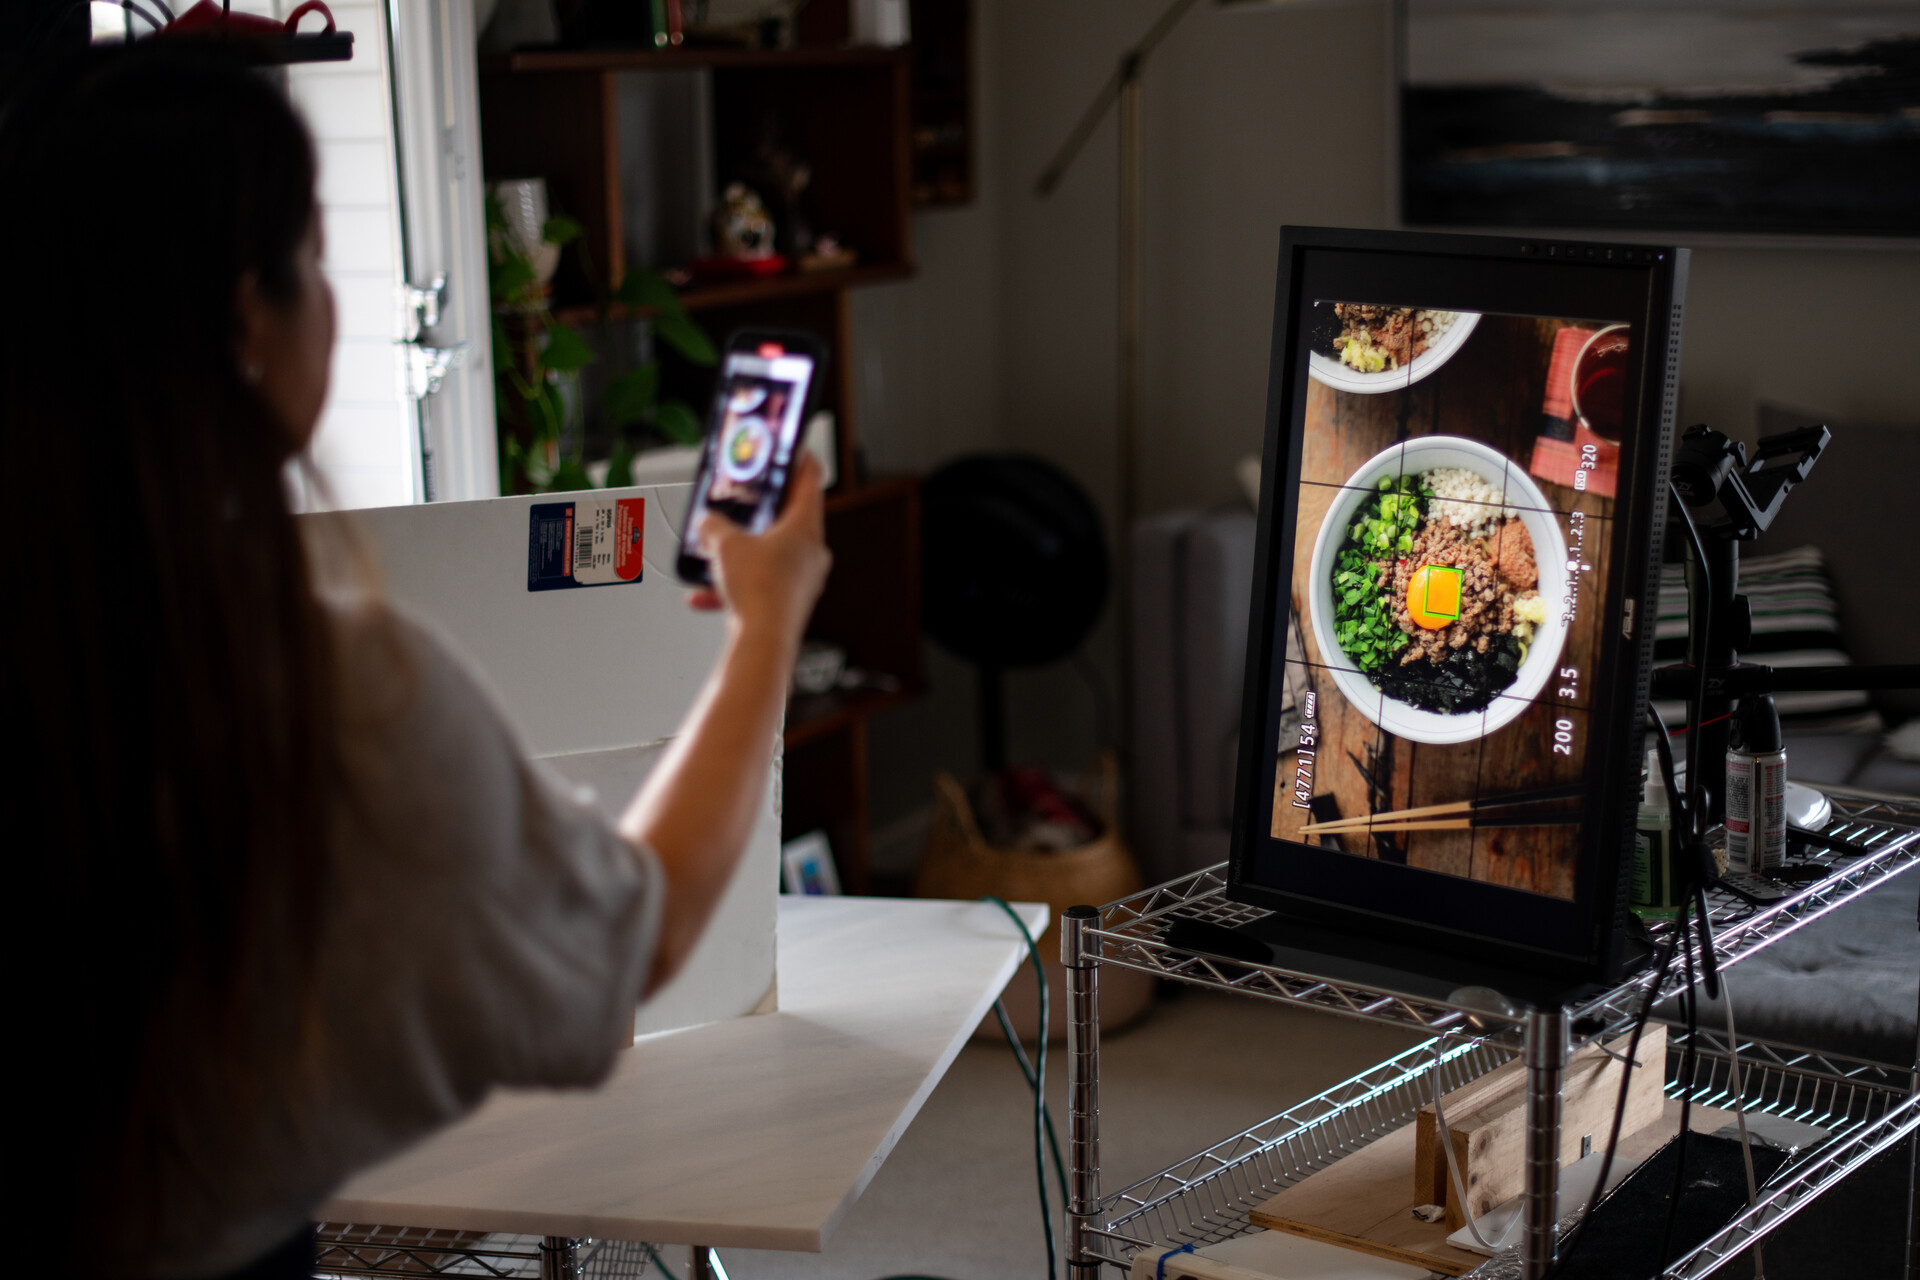 A woman uses her cellphone to take a photo of a picture of a bowl of noodles that's projected onto a large flat-screen monitor.